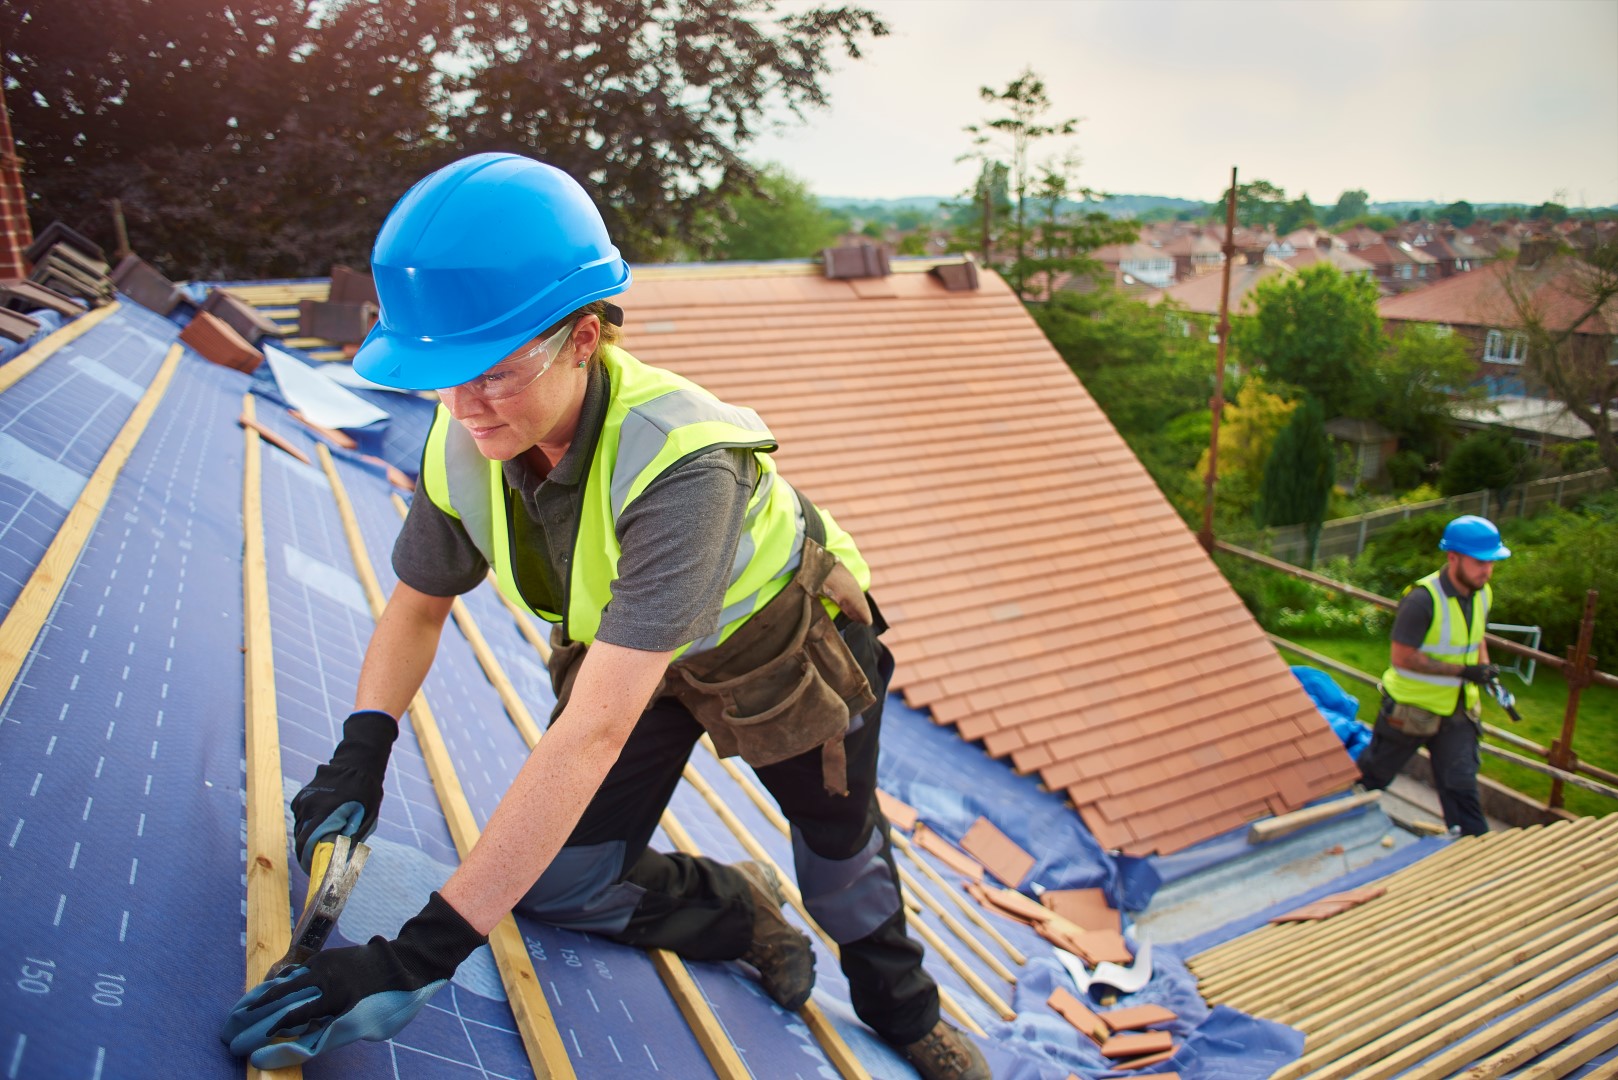 a female roofer nails on the roof tiles with her colleague